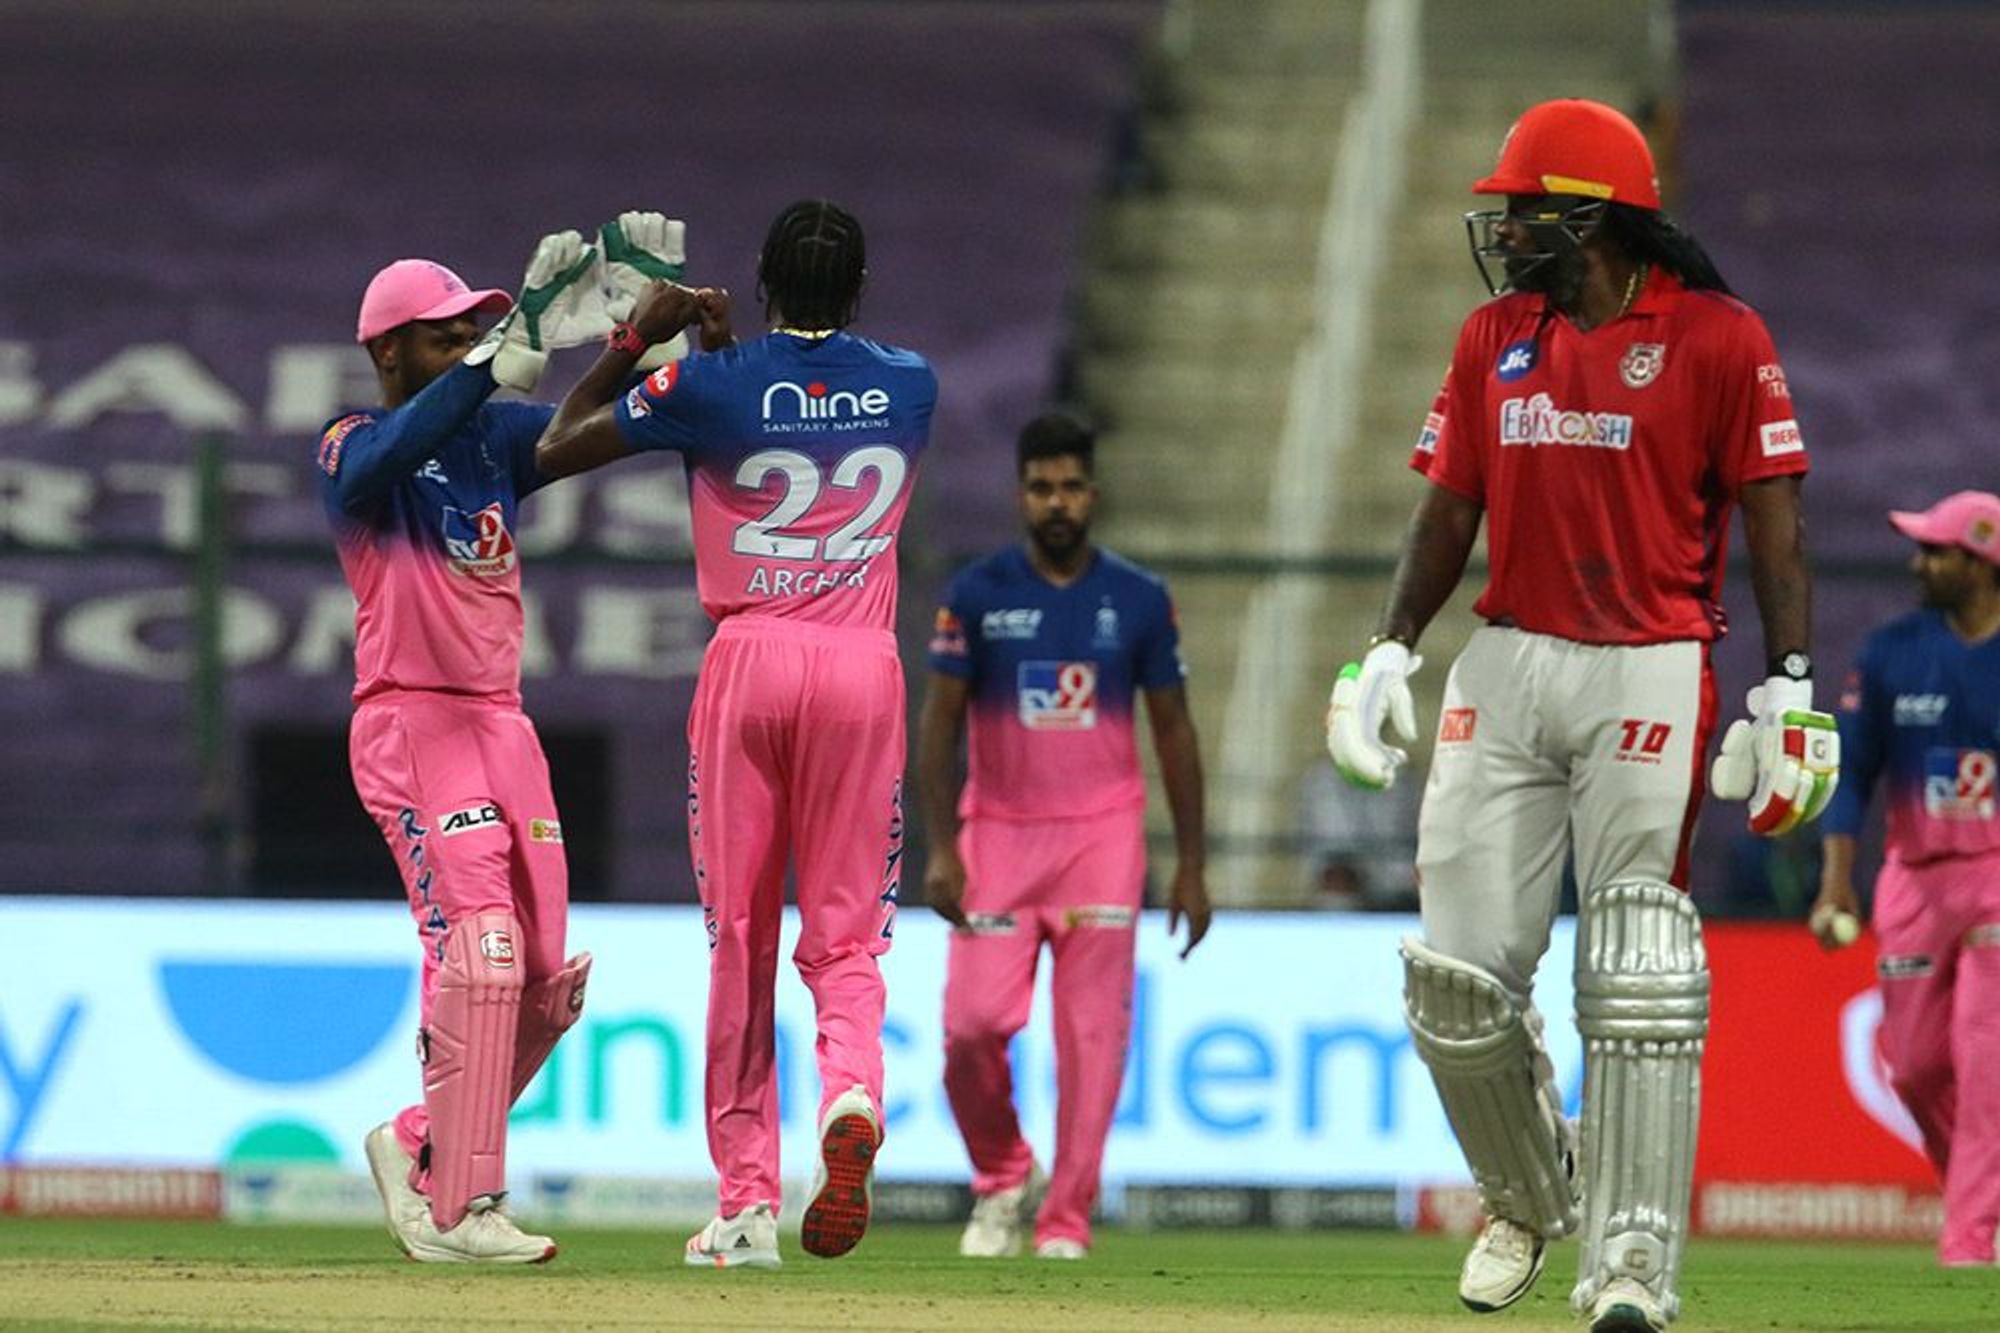 IPL 2020: RR cruise to 7 wicket win against KXIP